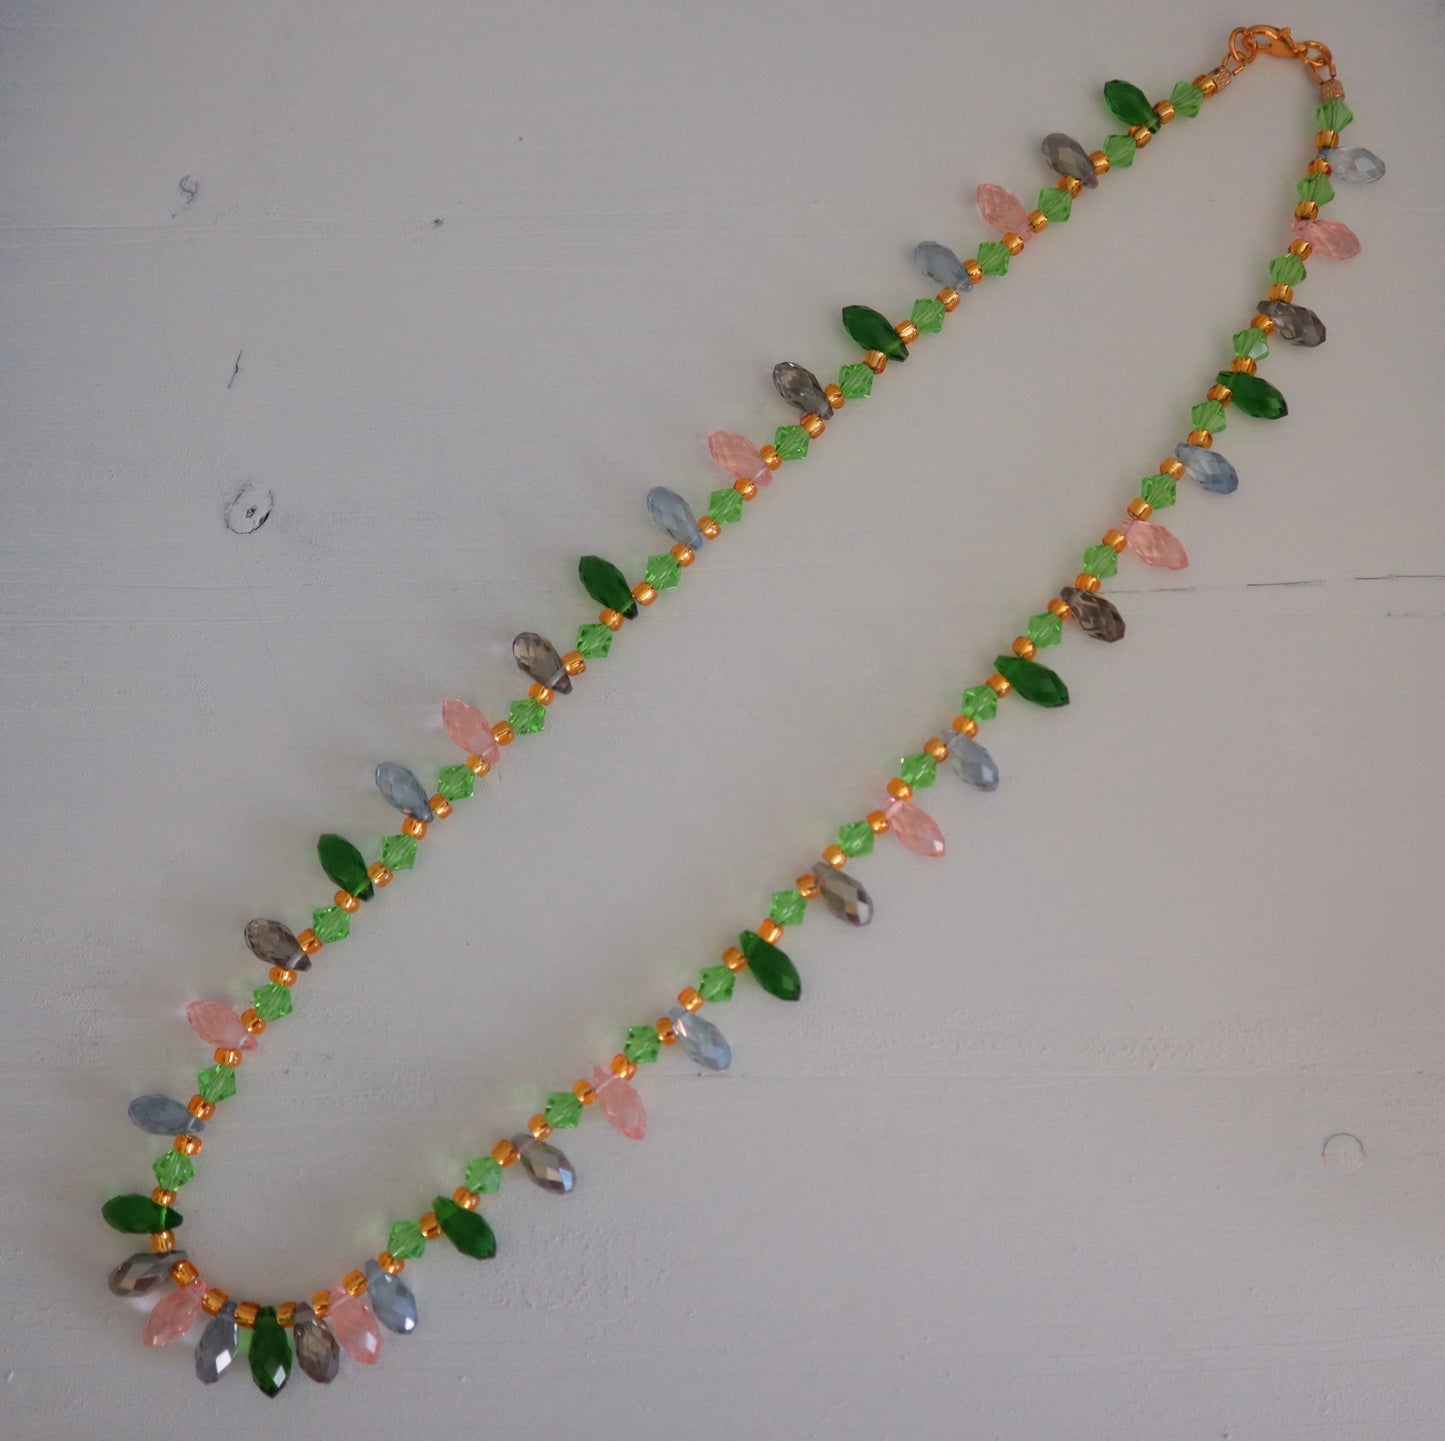 Green Crystal Necklace